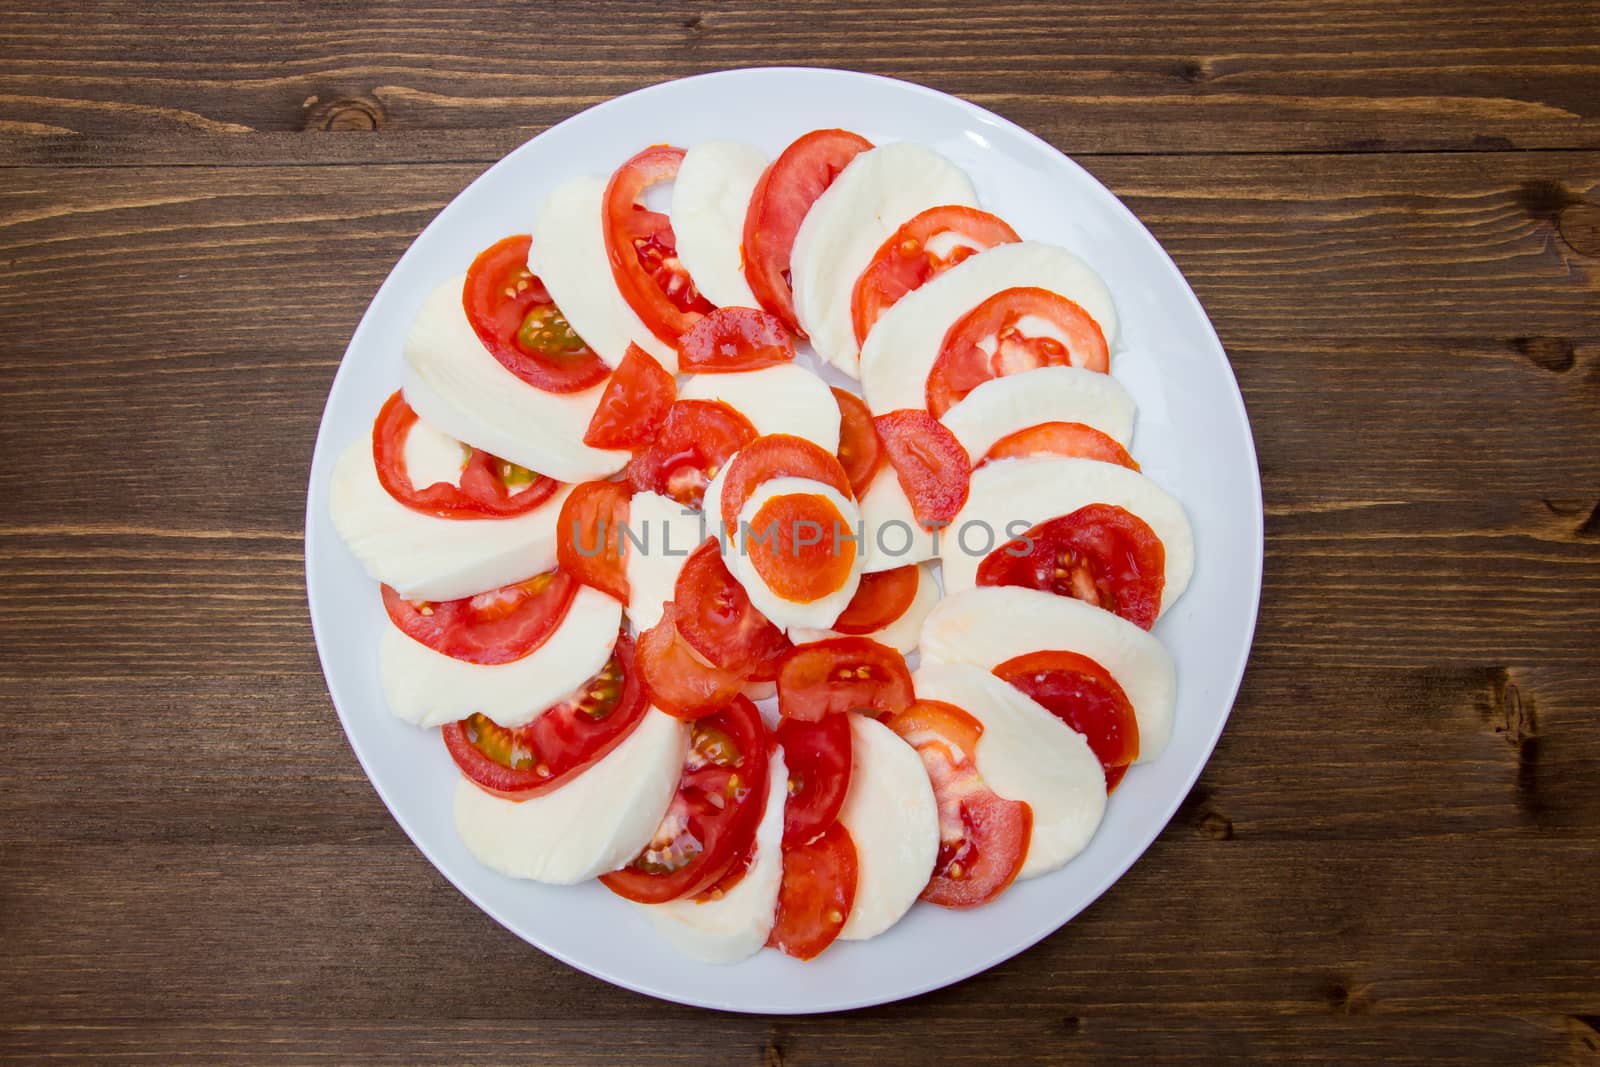 Tomato and mozzarella on a plate on a wooden table seen from above